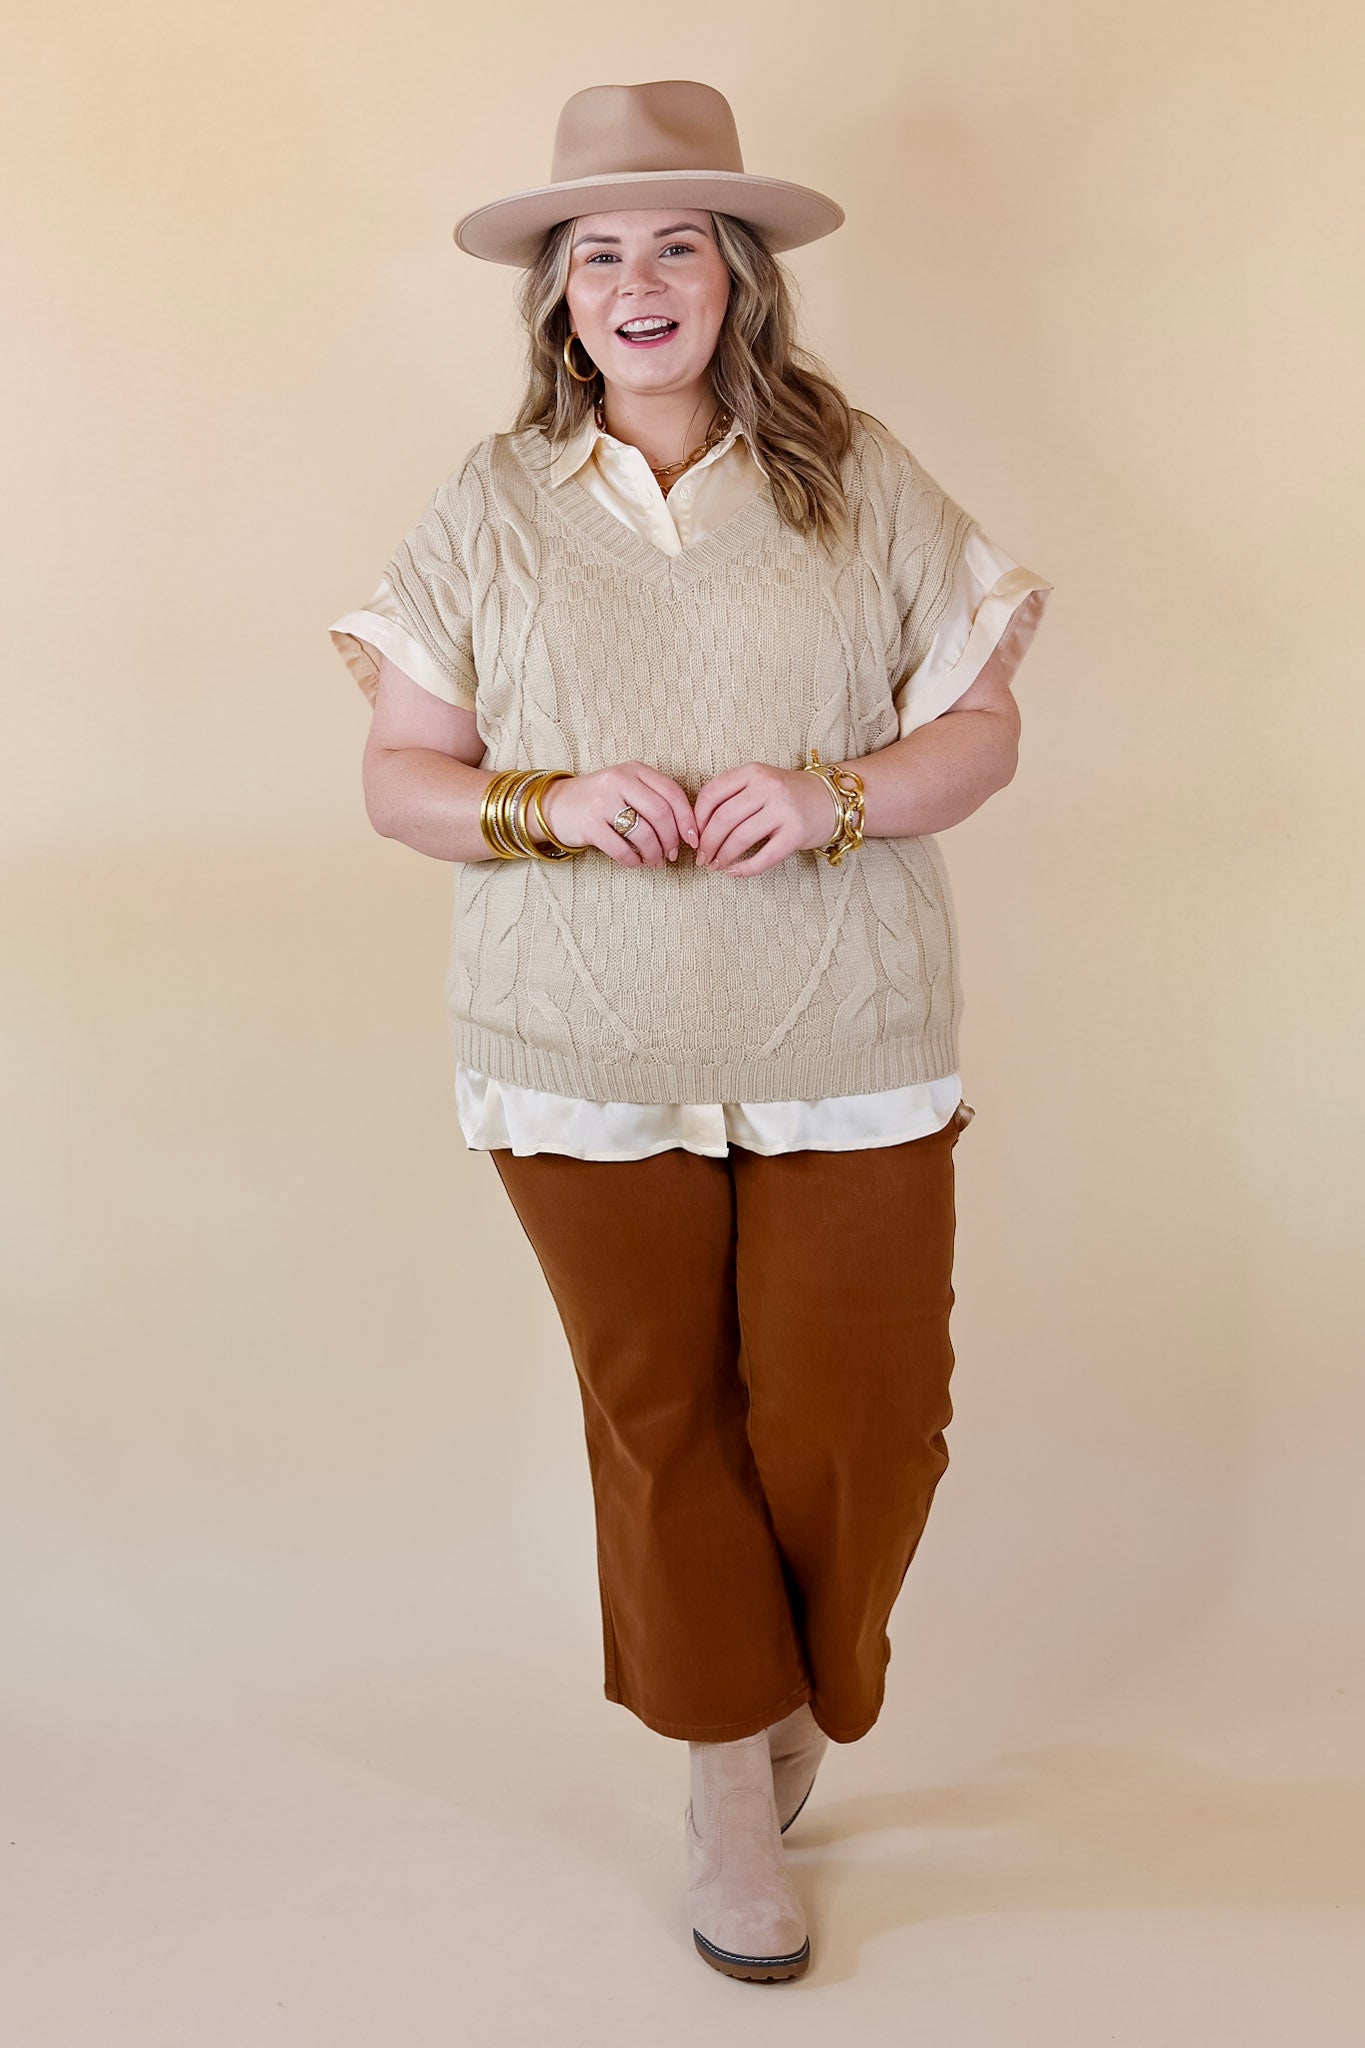 Dream On V Neck Cap Sleeve Sweater in Beige - Giddy Up Glamour Boutique